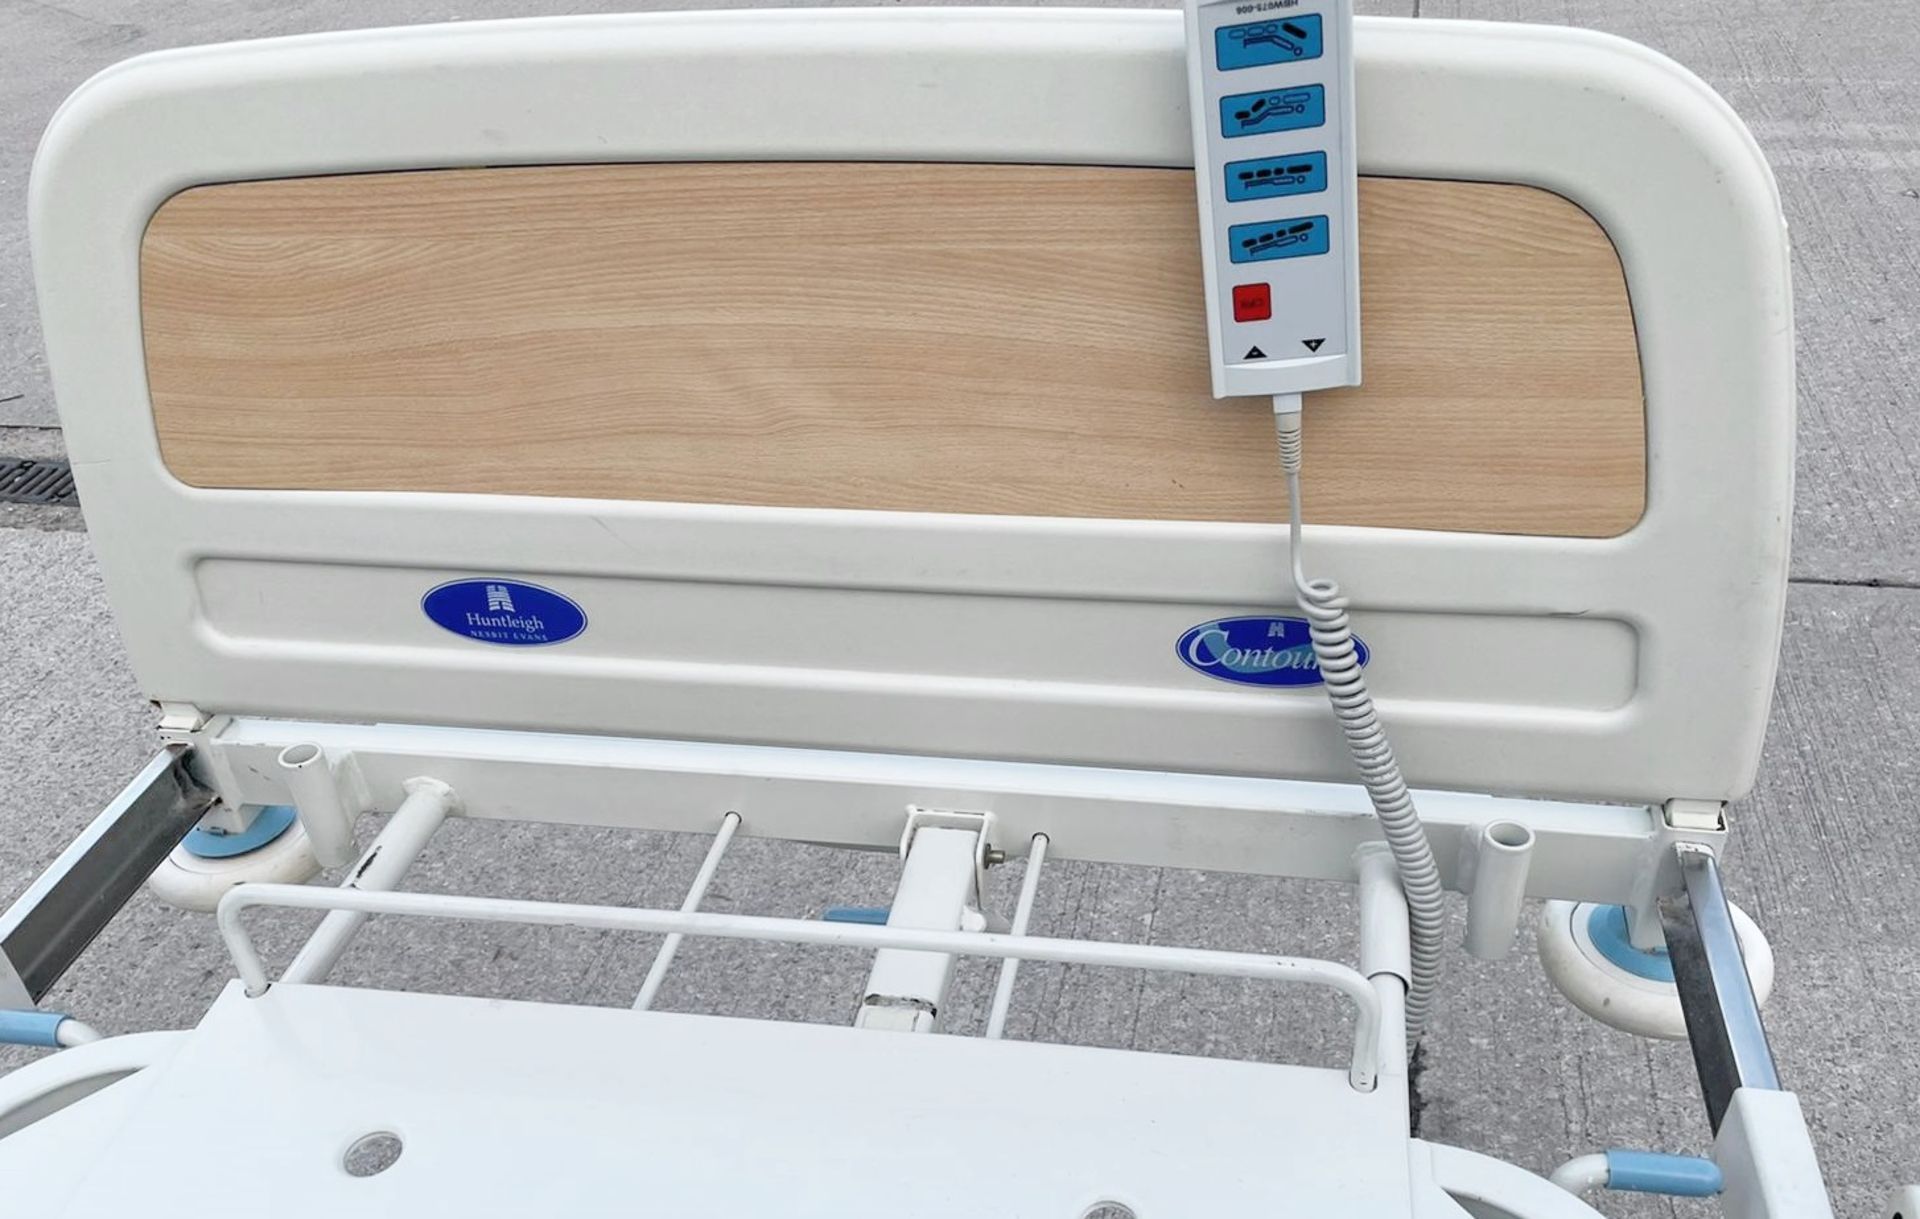 1 x Huntleigh CONTOURA Electric Hospital Bed - Features Rise/Fall 3-Way Profiling, Side Rails, - Image 6 of 8